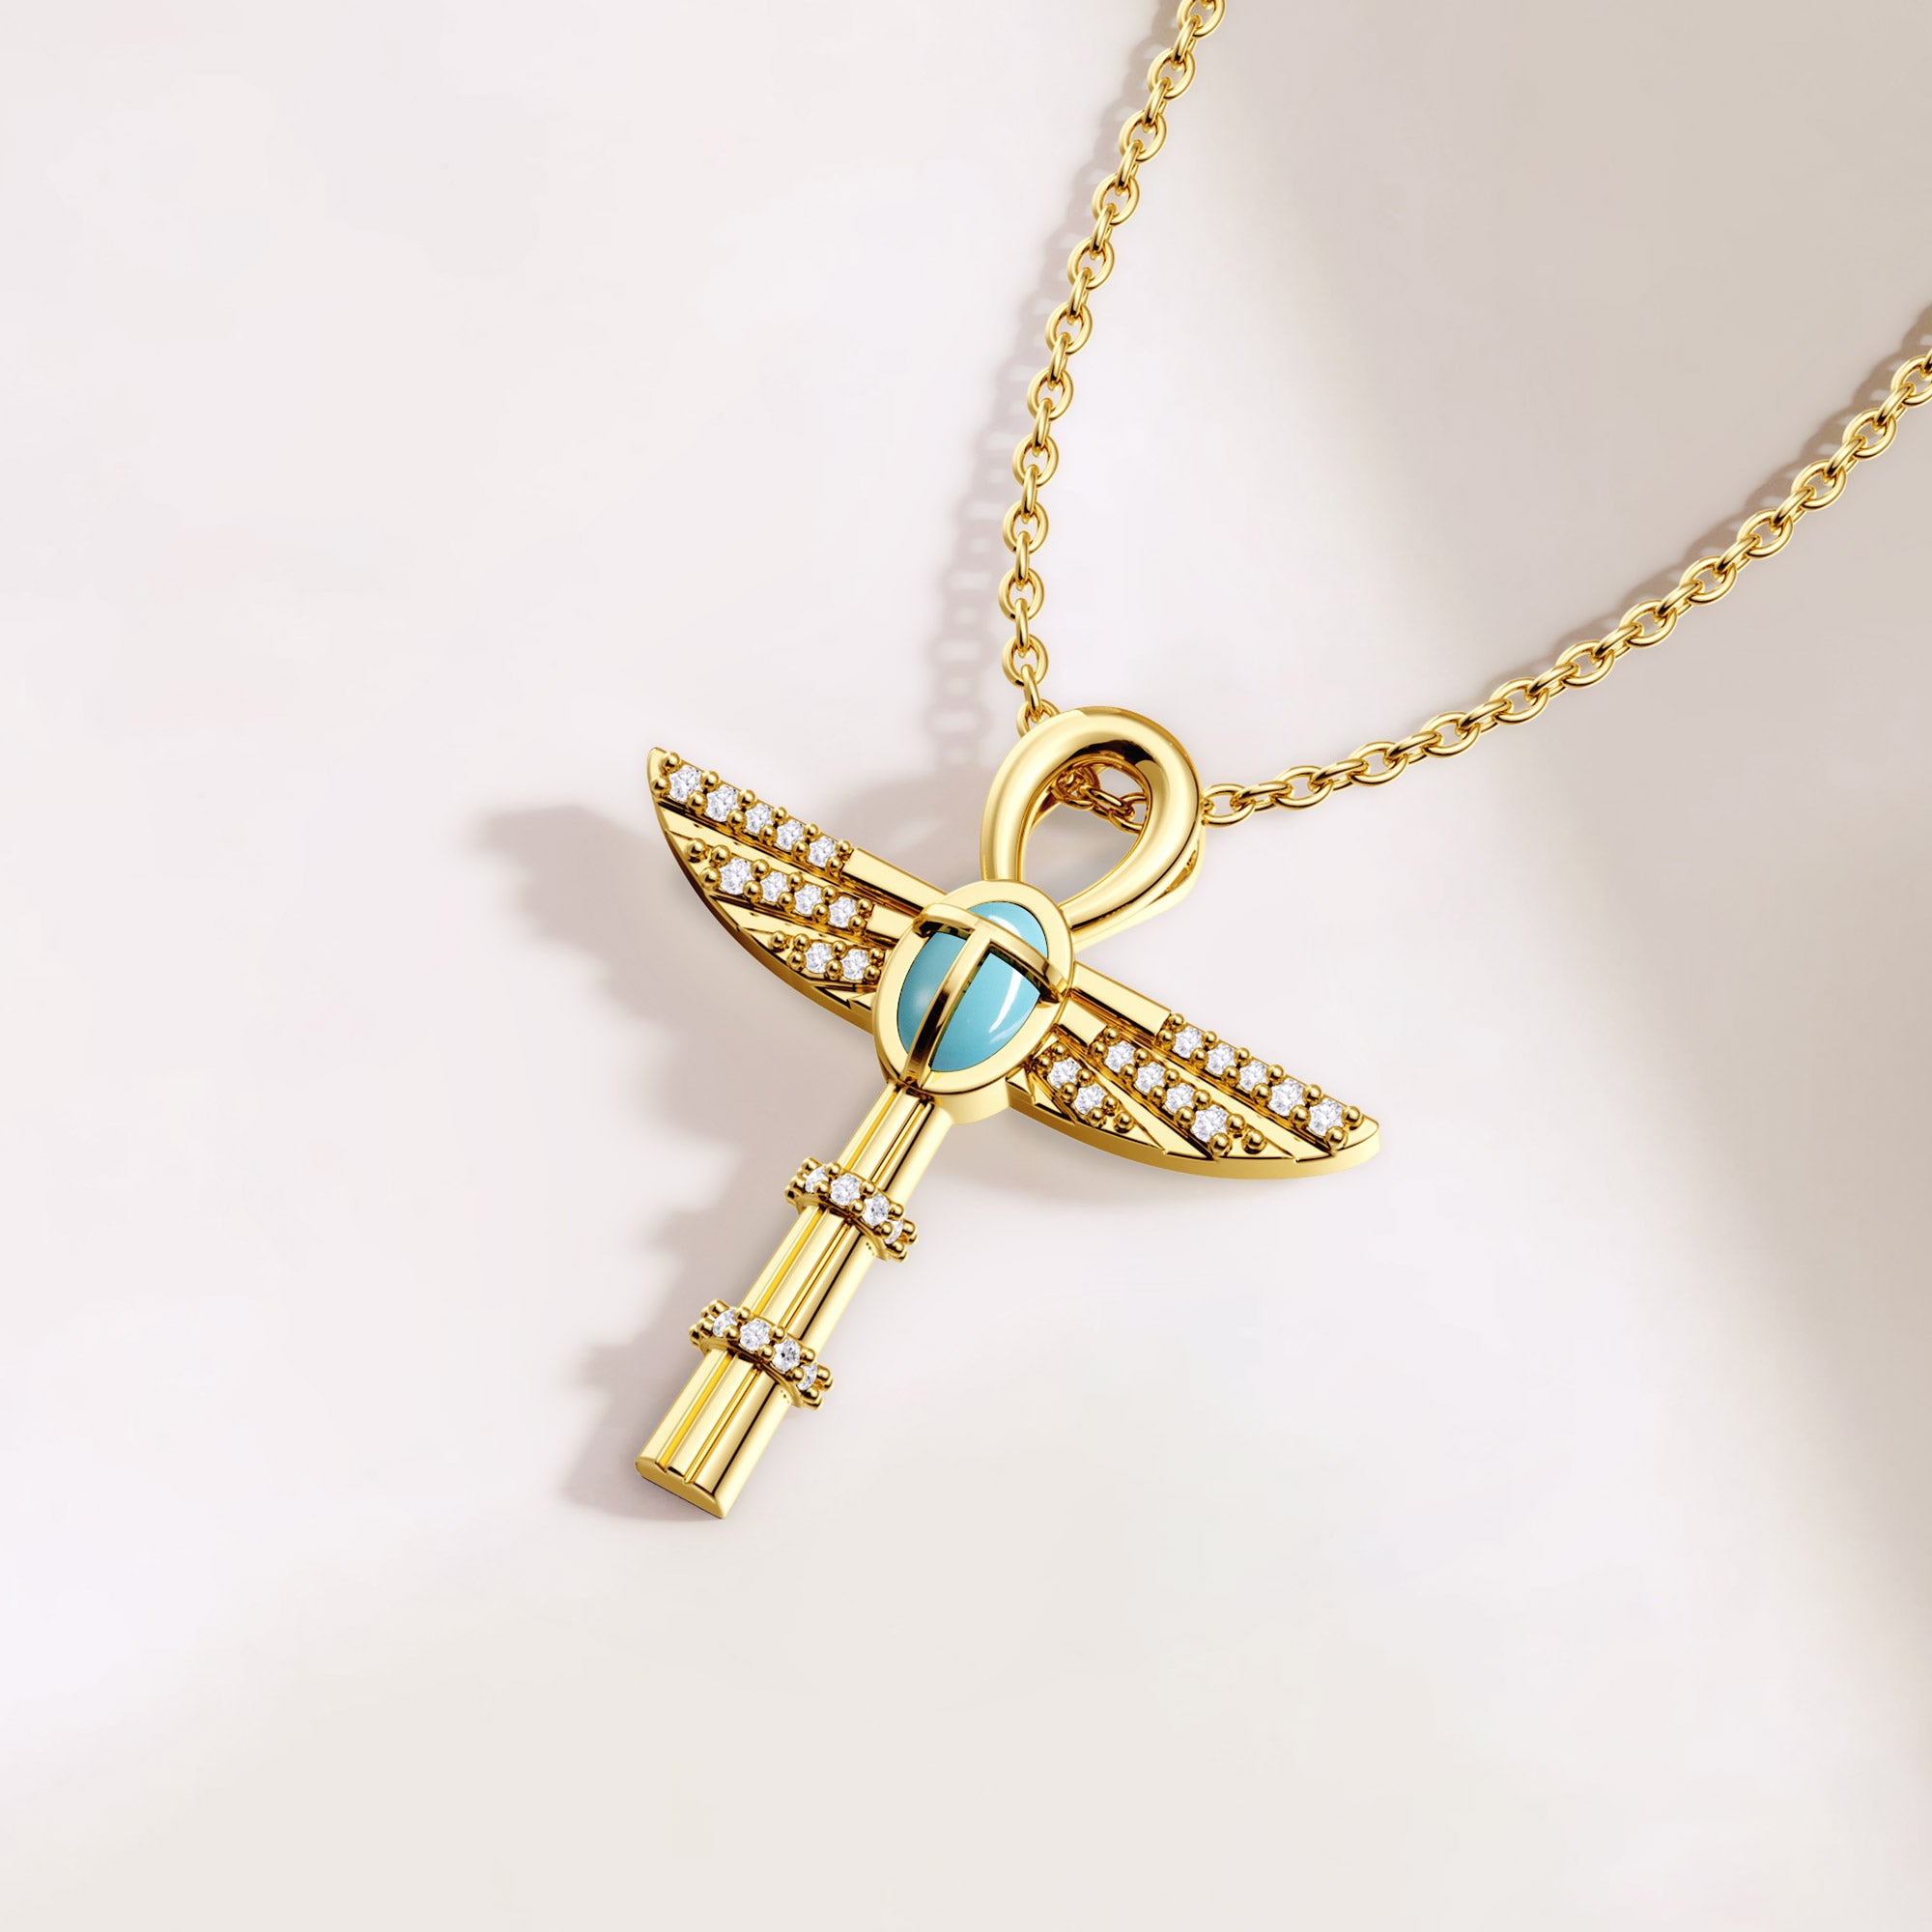 Eternal Guardian Ankh Scarab Turquoise Egyptian Scepter Protection Amulet Pendant Necklace - vanimy